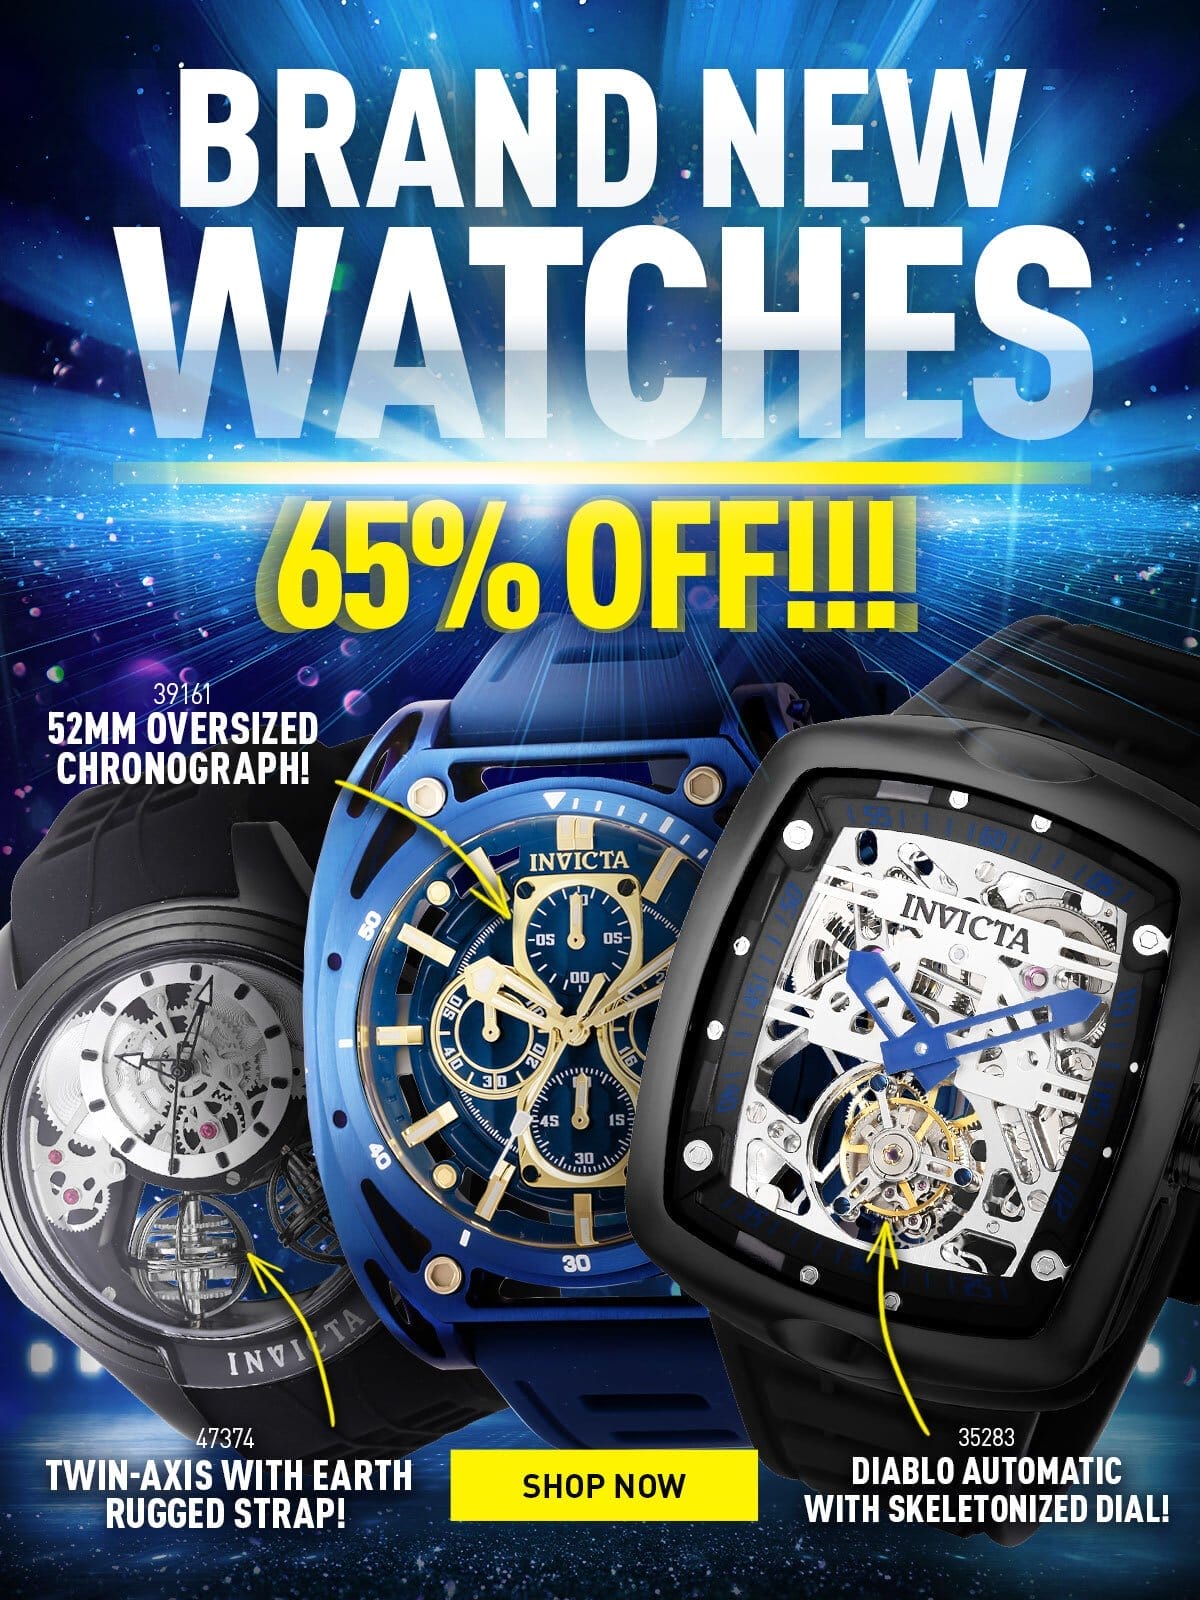 Brand new watches - 65% off!!!